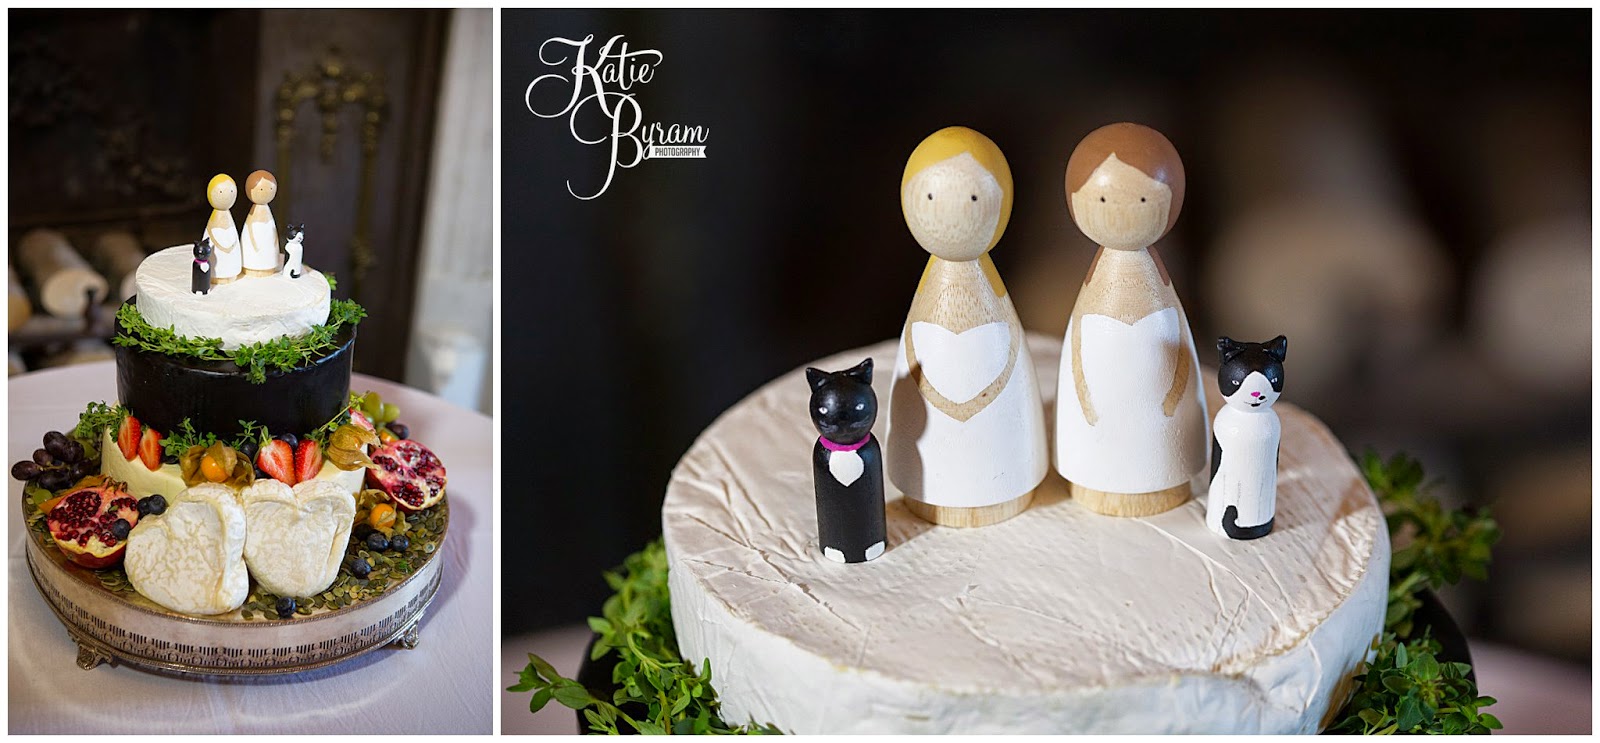 churchmouse cheese, cheese wedding cake, wooden cake toppers, matfen hall wedding, matfen hall, northumberland wedding, newcastle united wedding, lesbian wedding, two bride wedding, lgbt wedding, gay wedding, civil partnership, powder and pin ups make up, katie byram photography, bride and bride, two weddiing dresses, mao couture bridal, jean hepple florist, 